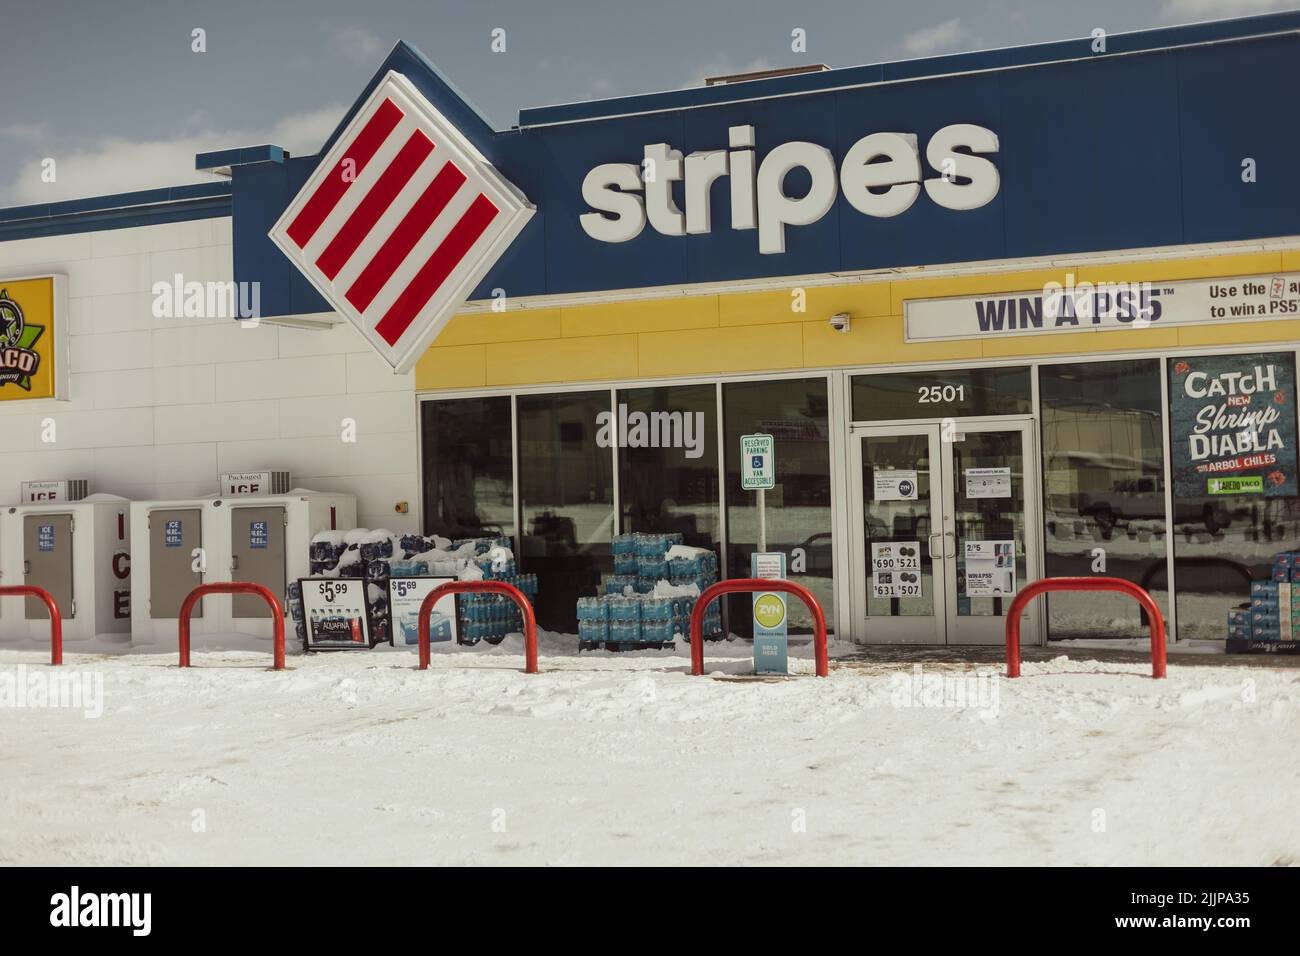 A view of a snowed gas station convenience store Stock Photo